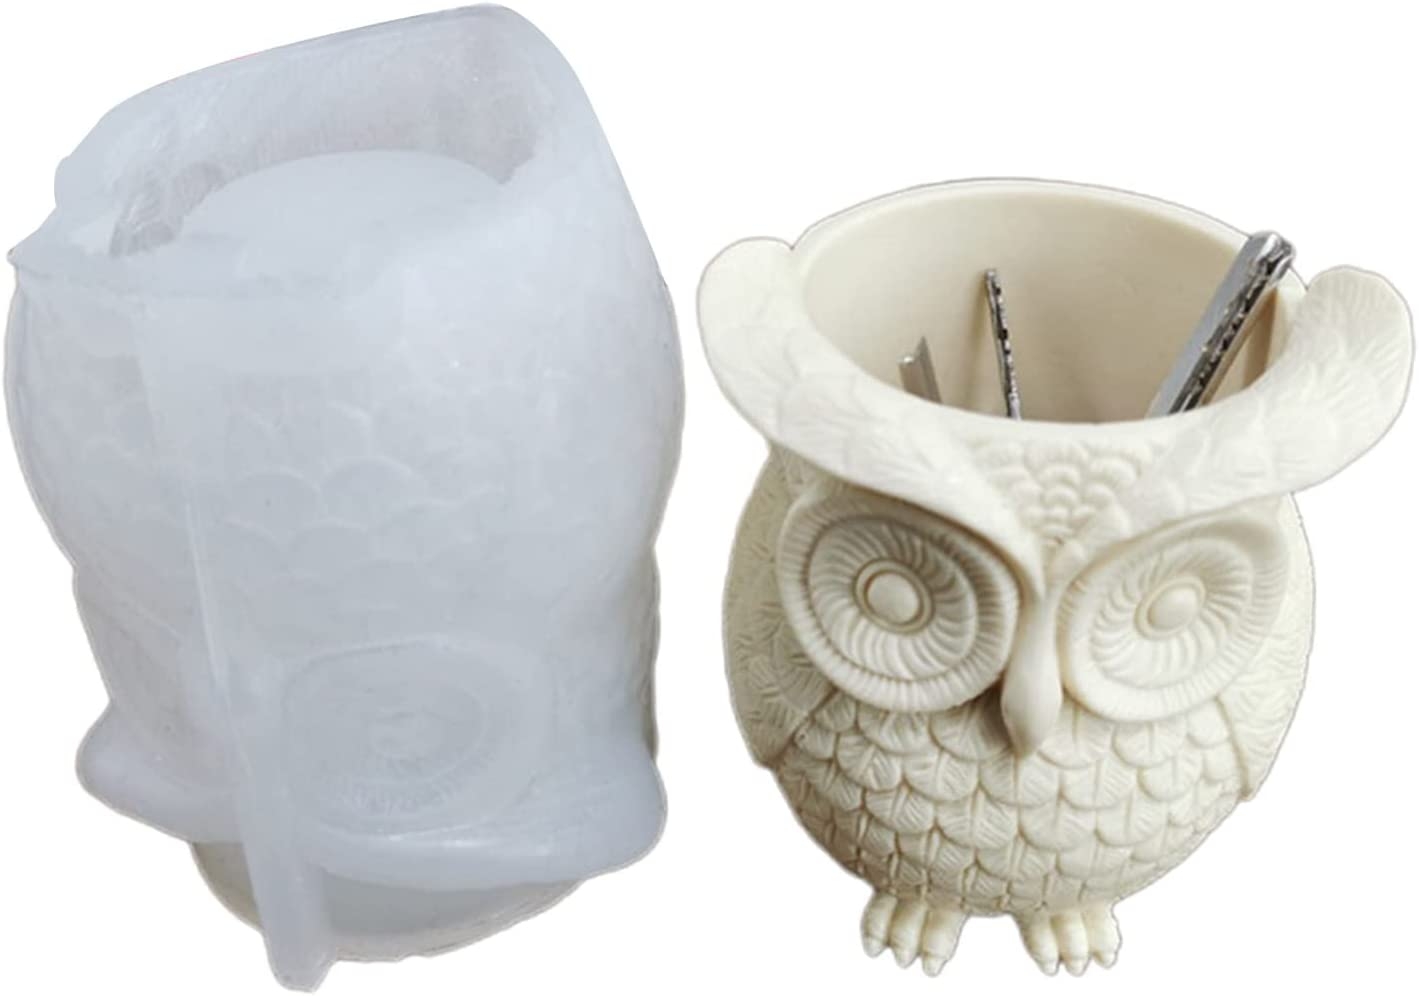 Silicone Planter Molds Owl Mold for Handmade Flower Pots Pen Holder Molds Resin Crafts Clay Molds DIY Hand Crafts Import To Shop